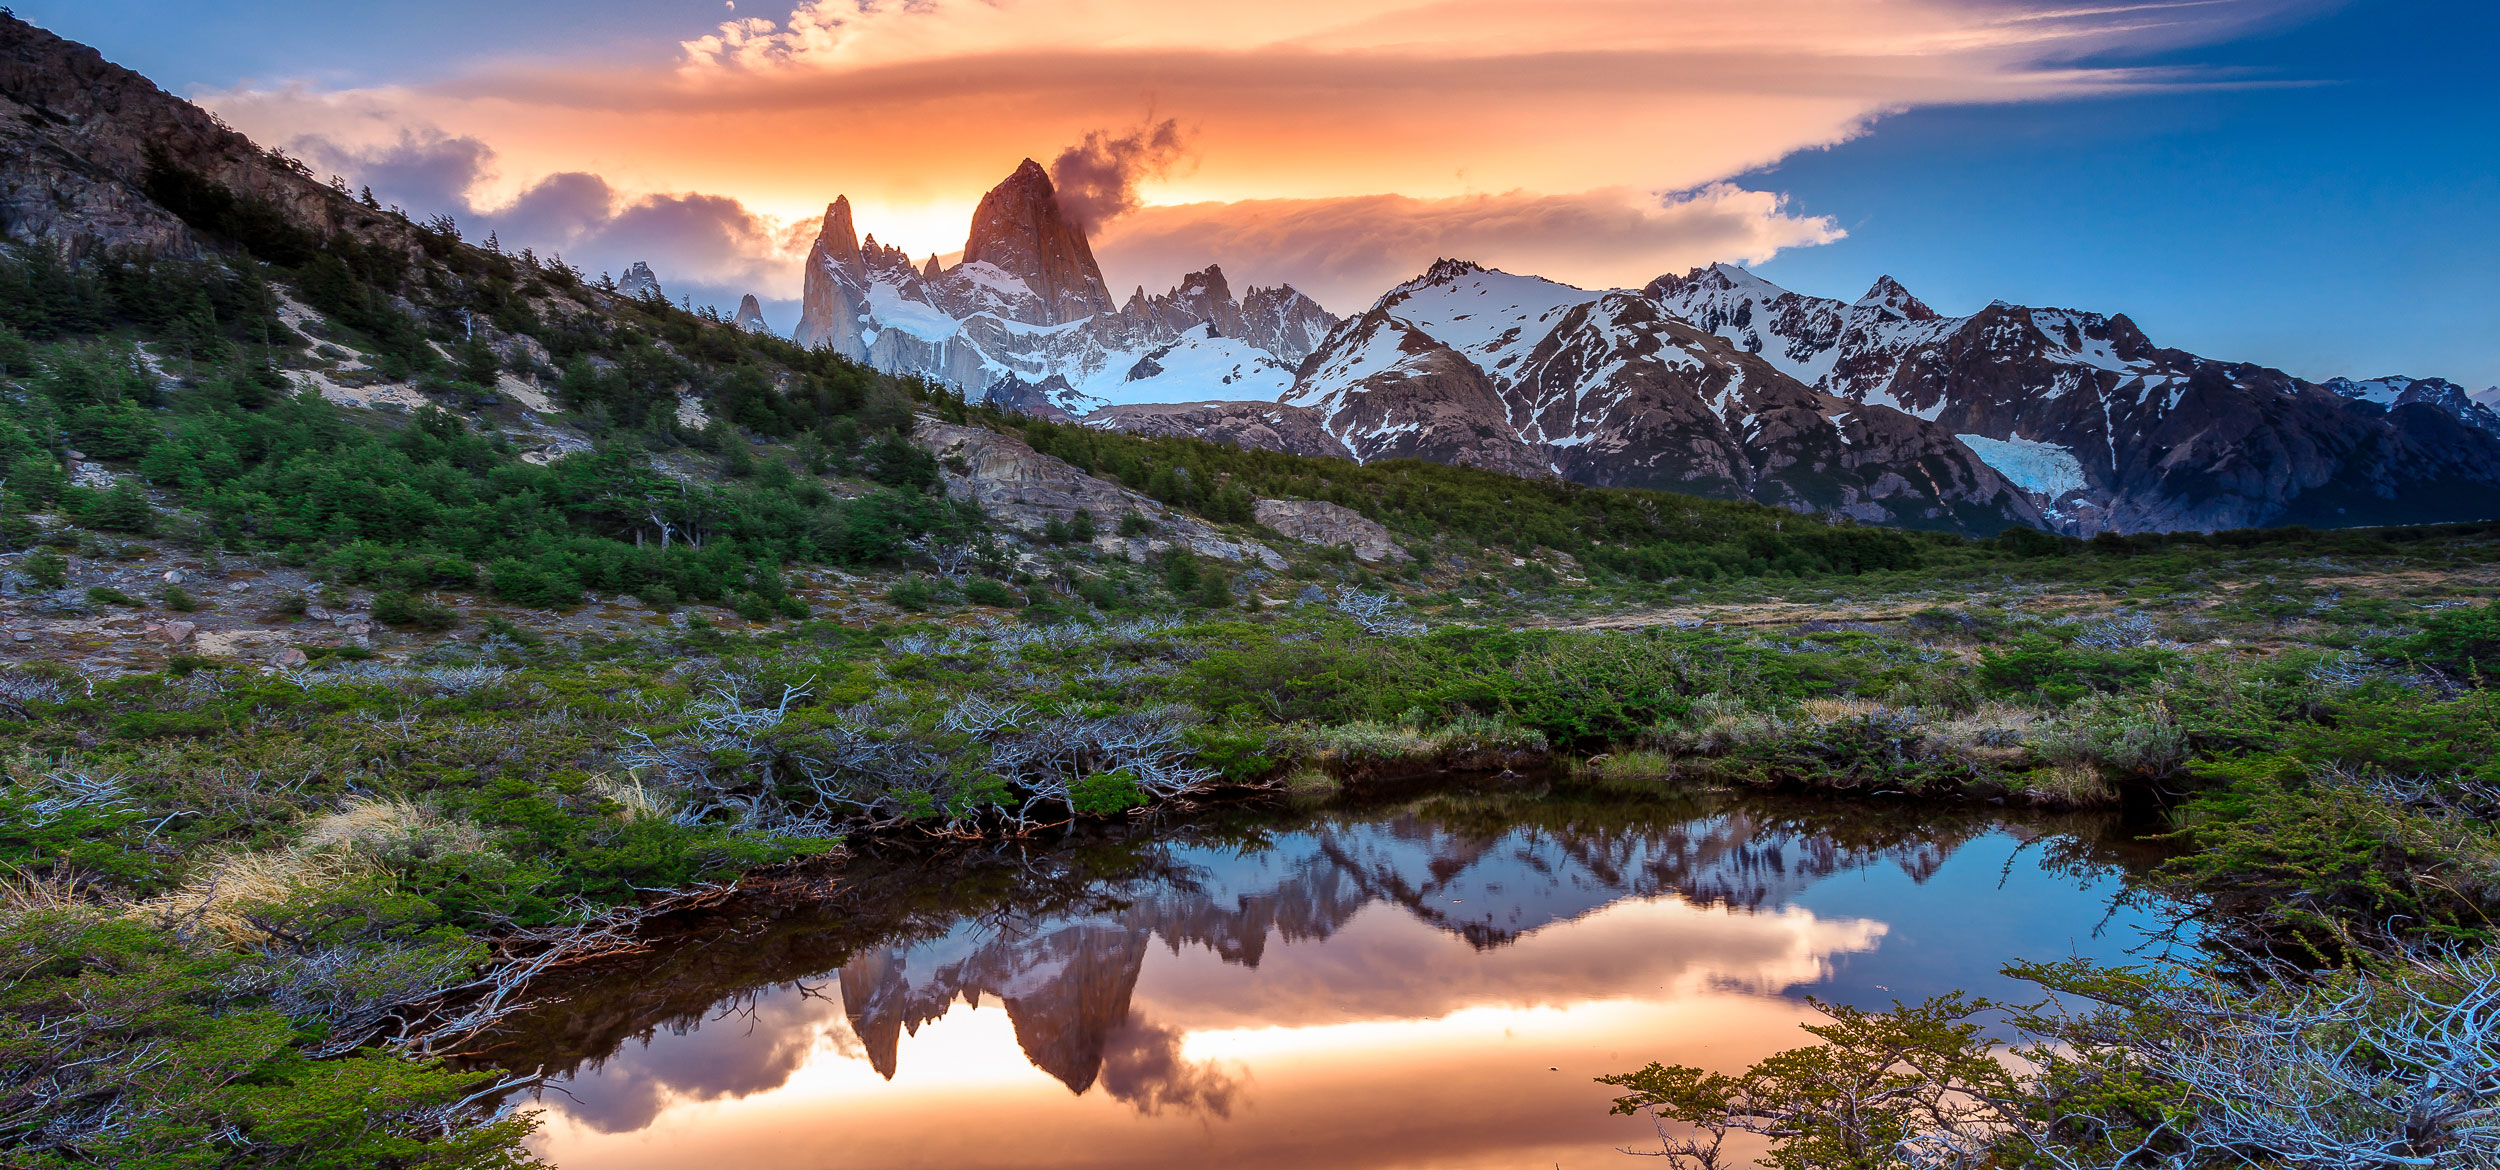 A sunset view of Mt Fitz Roy with a reflection in a grassy pond in Los Glaciares National Park, Argentina